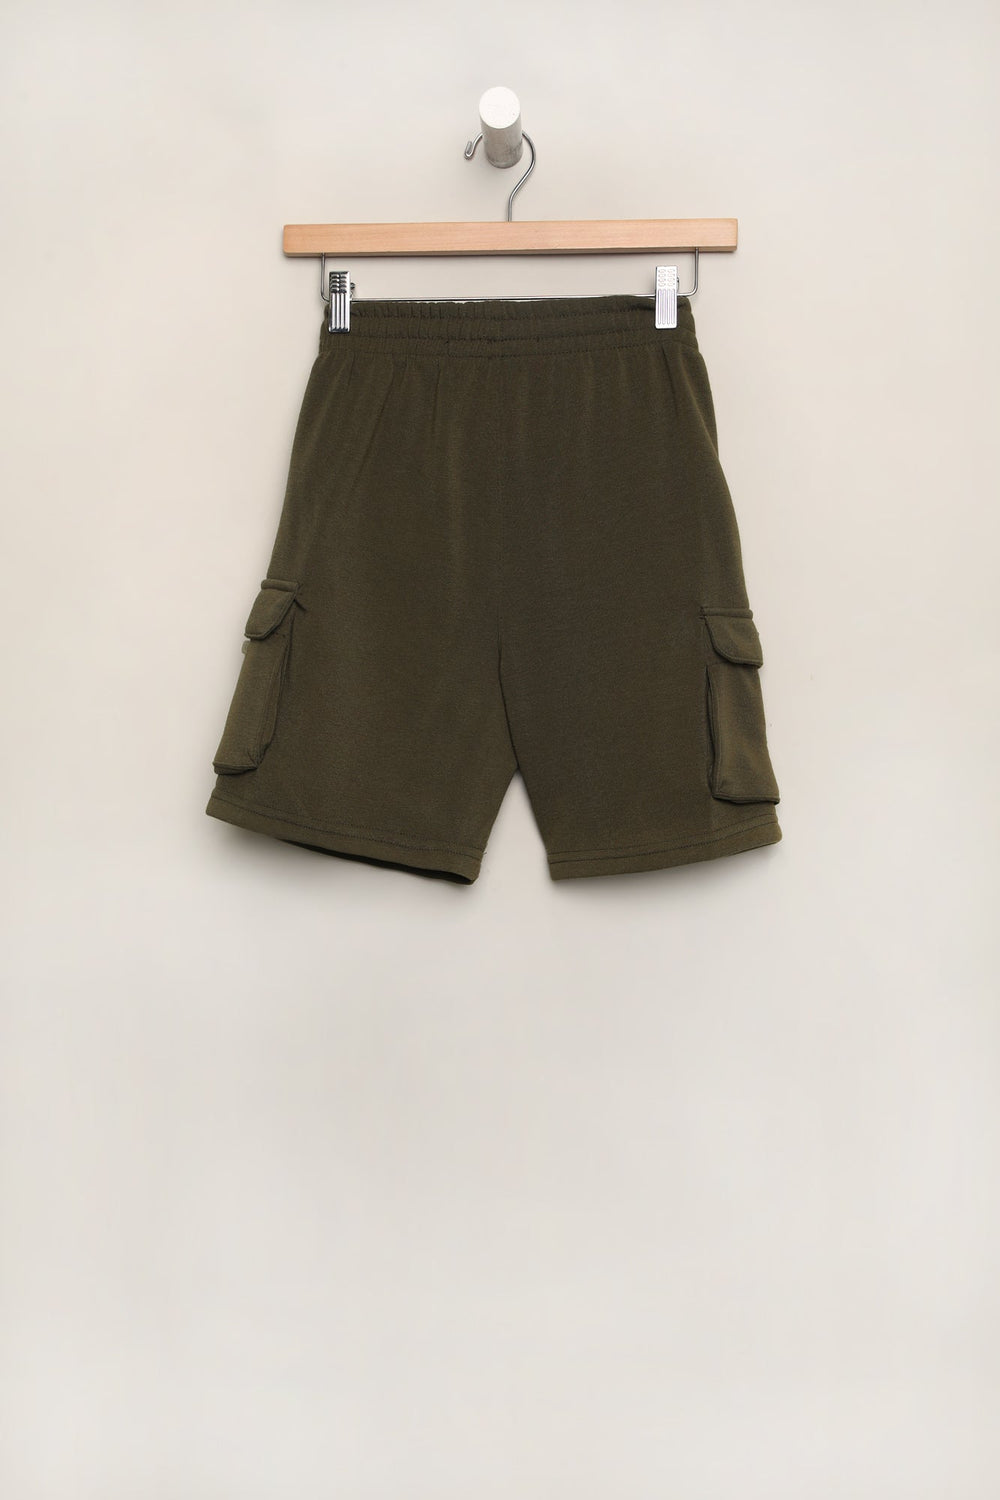 West49 Youth Fleece Solid Colour Cargo Shorts West49 Youth Fleece Solid Colour Cargo Shorts